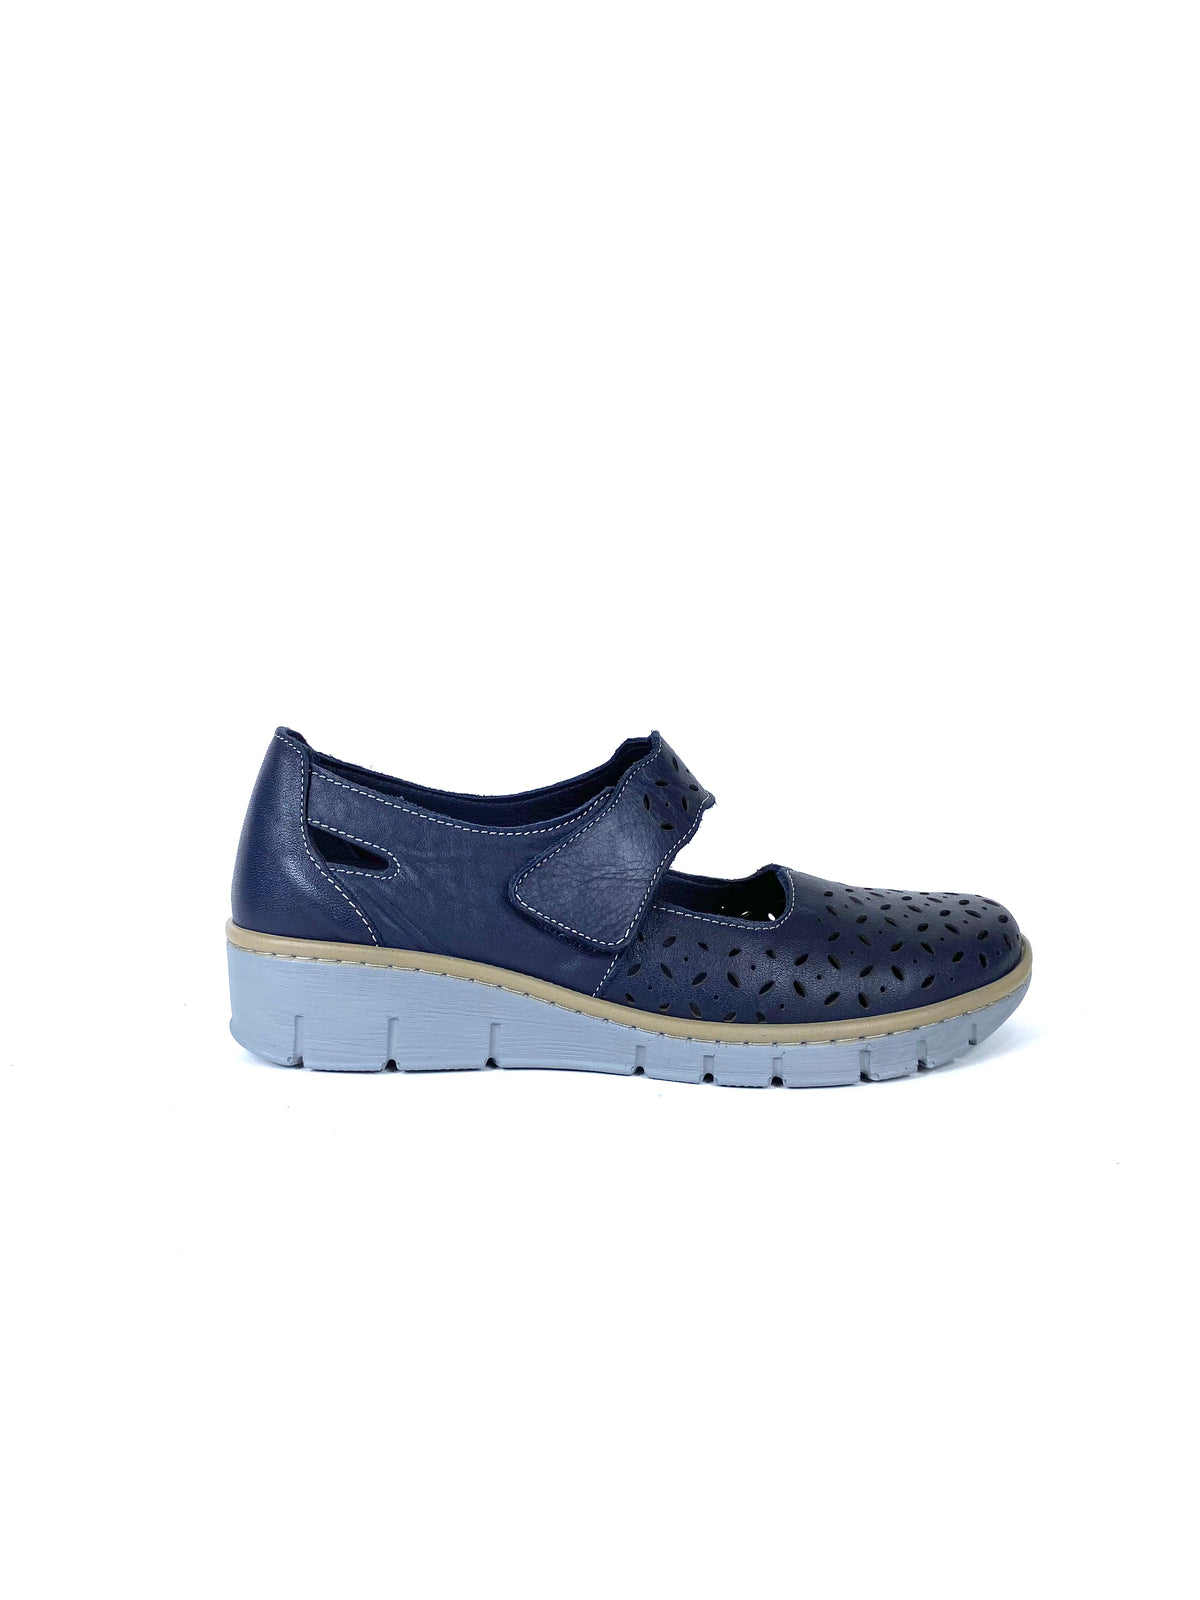 Softmode- Navy Perforated Slip on